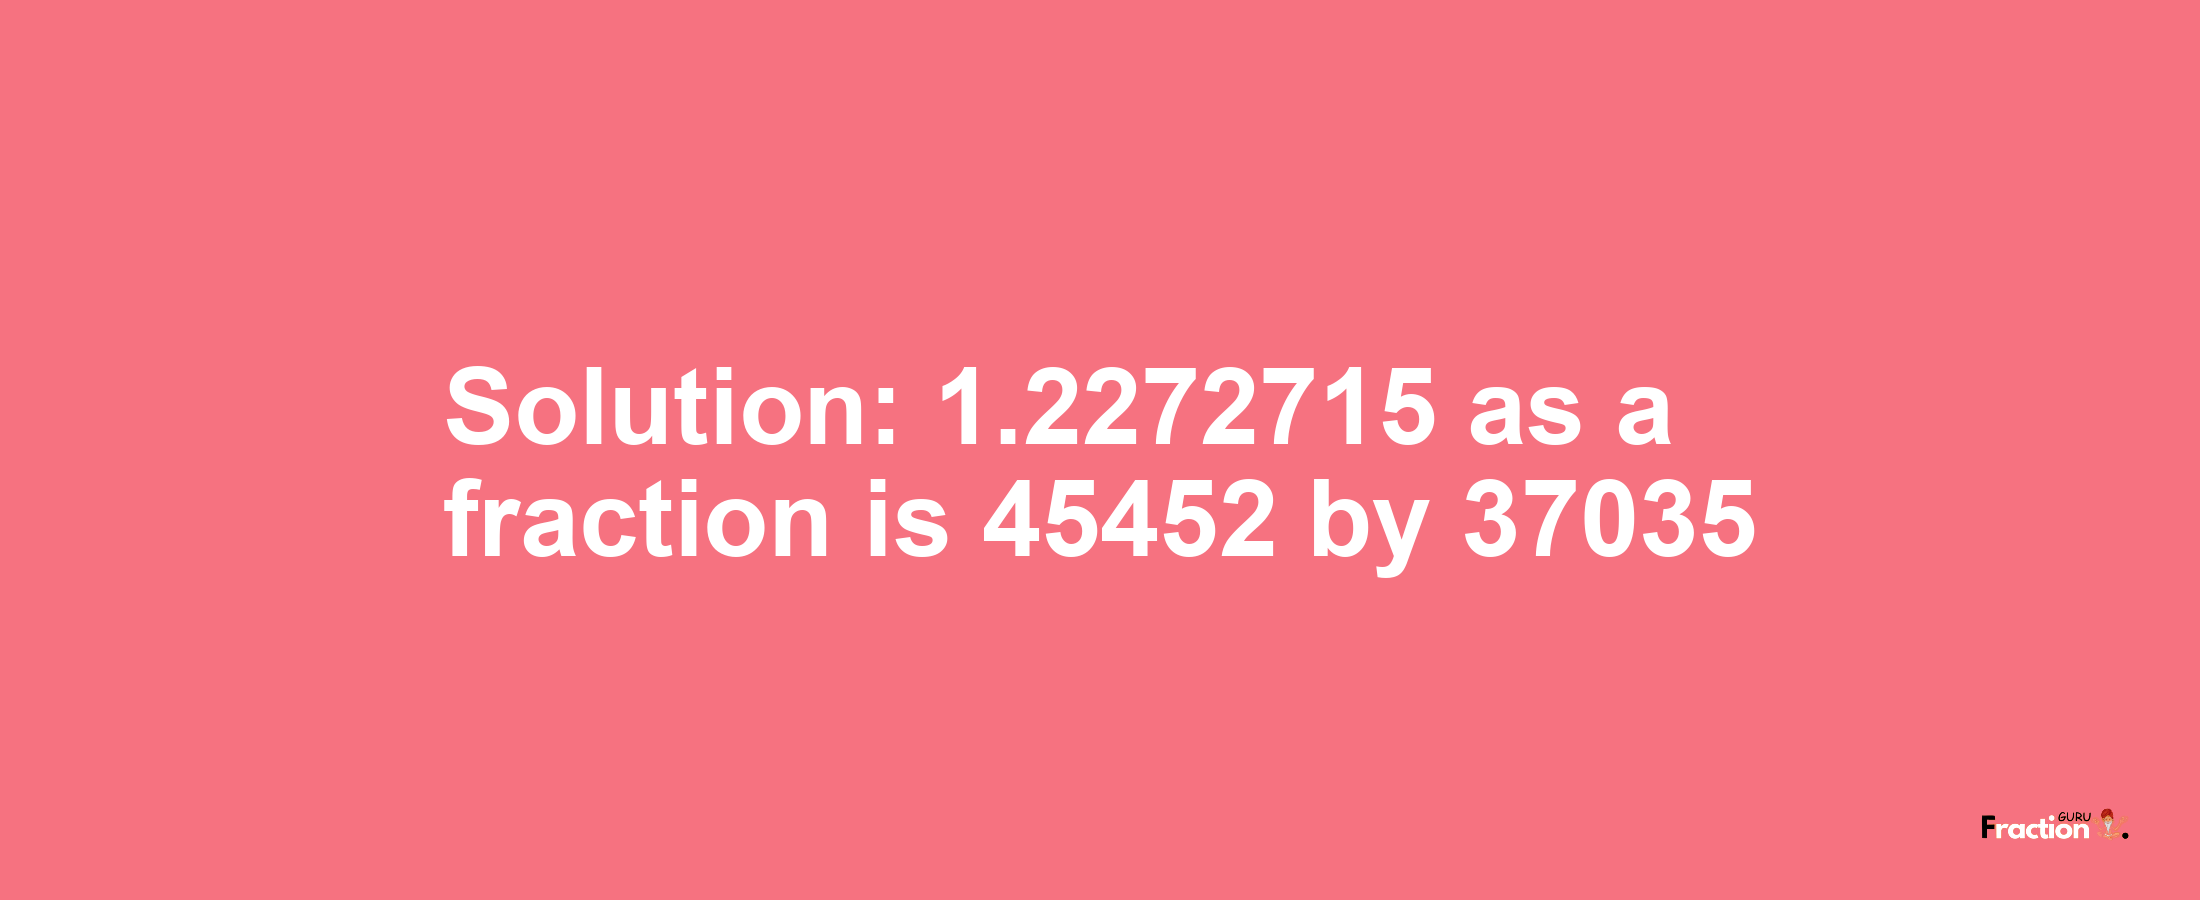 Solution:1.2272715 as a fraction is 45452/37035